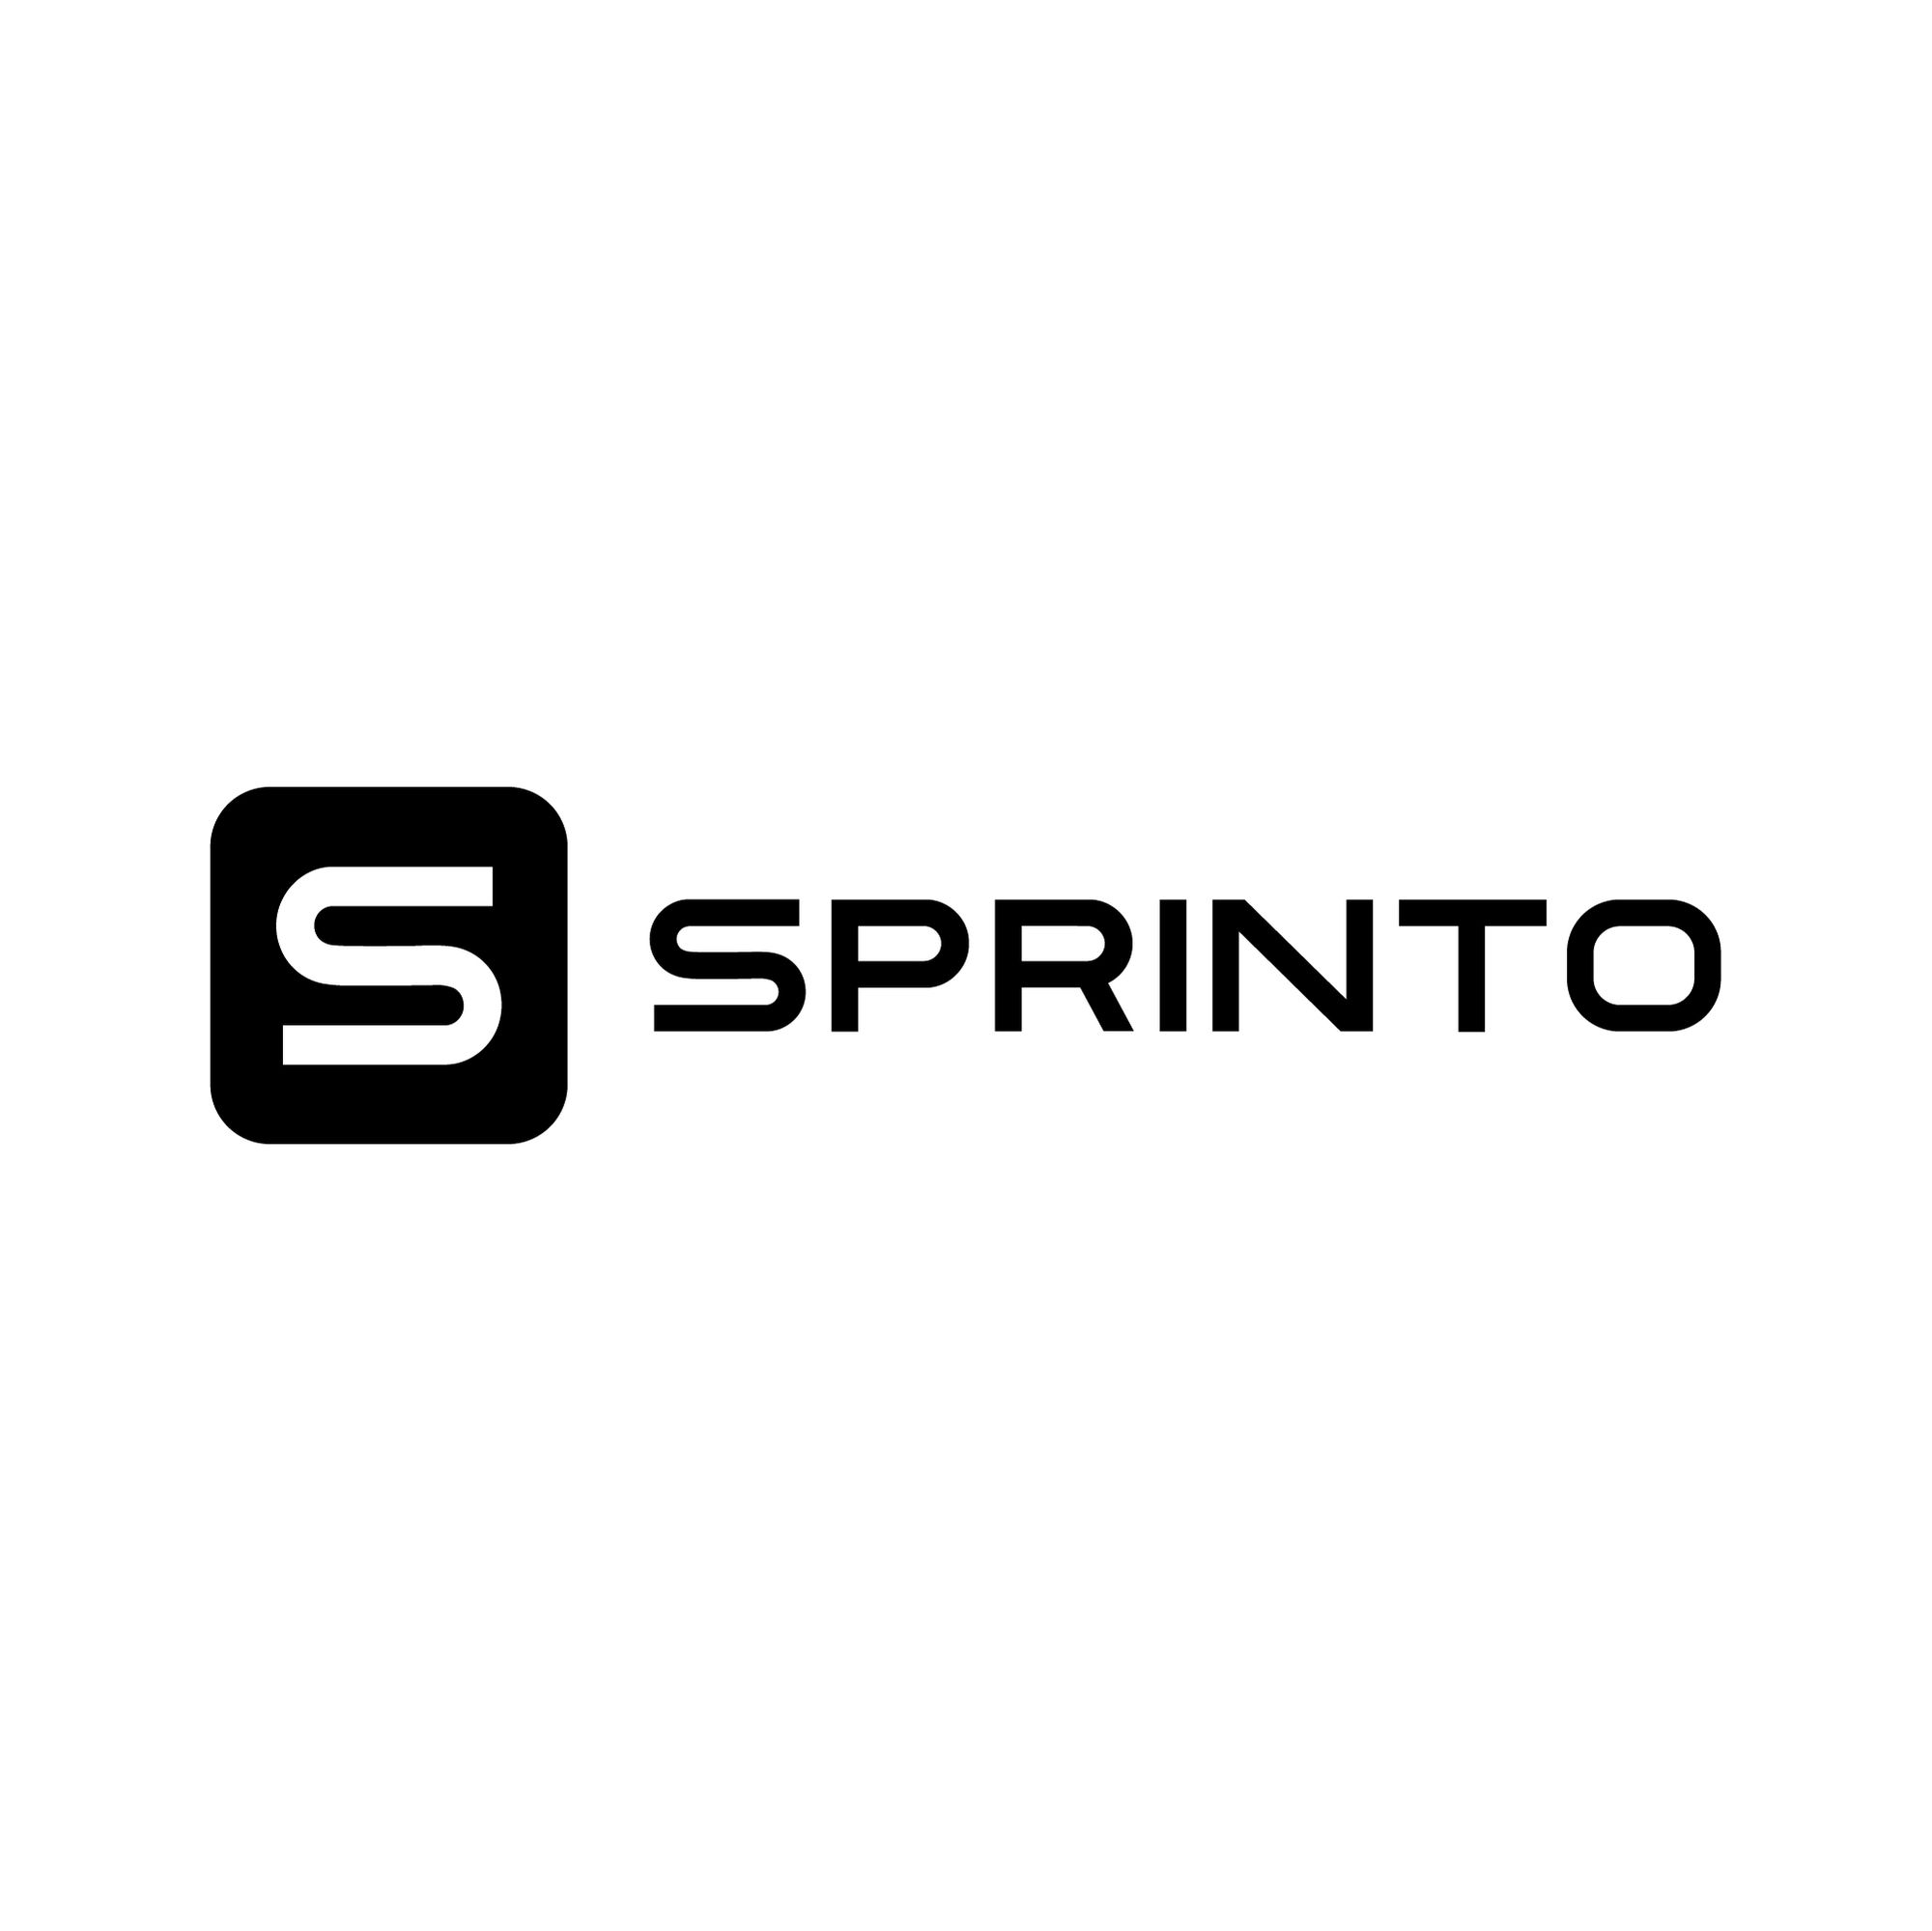 Sprinto secures $20M Series B led by XYZ Ventures